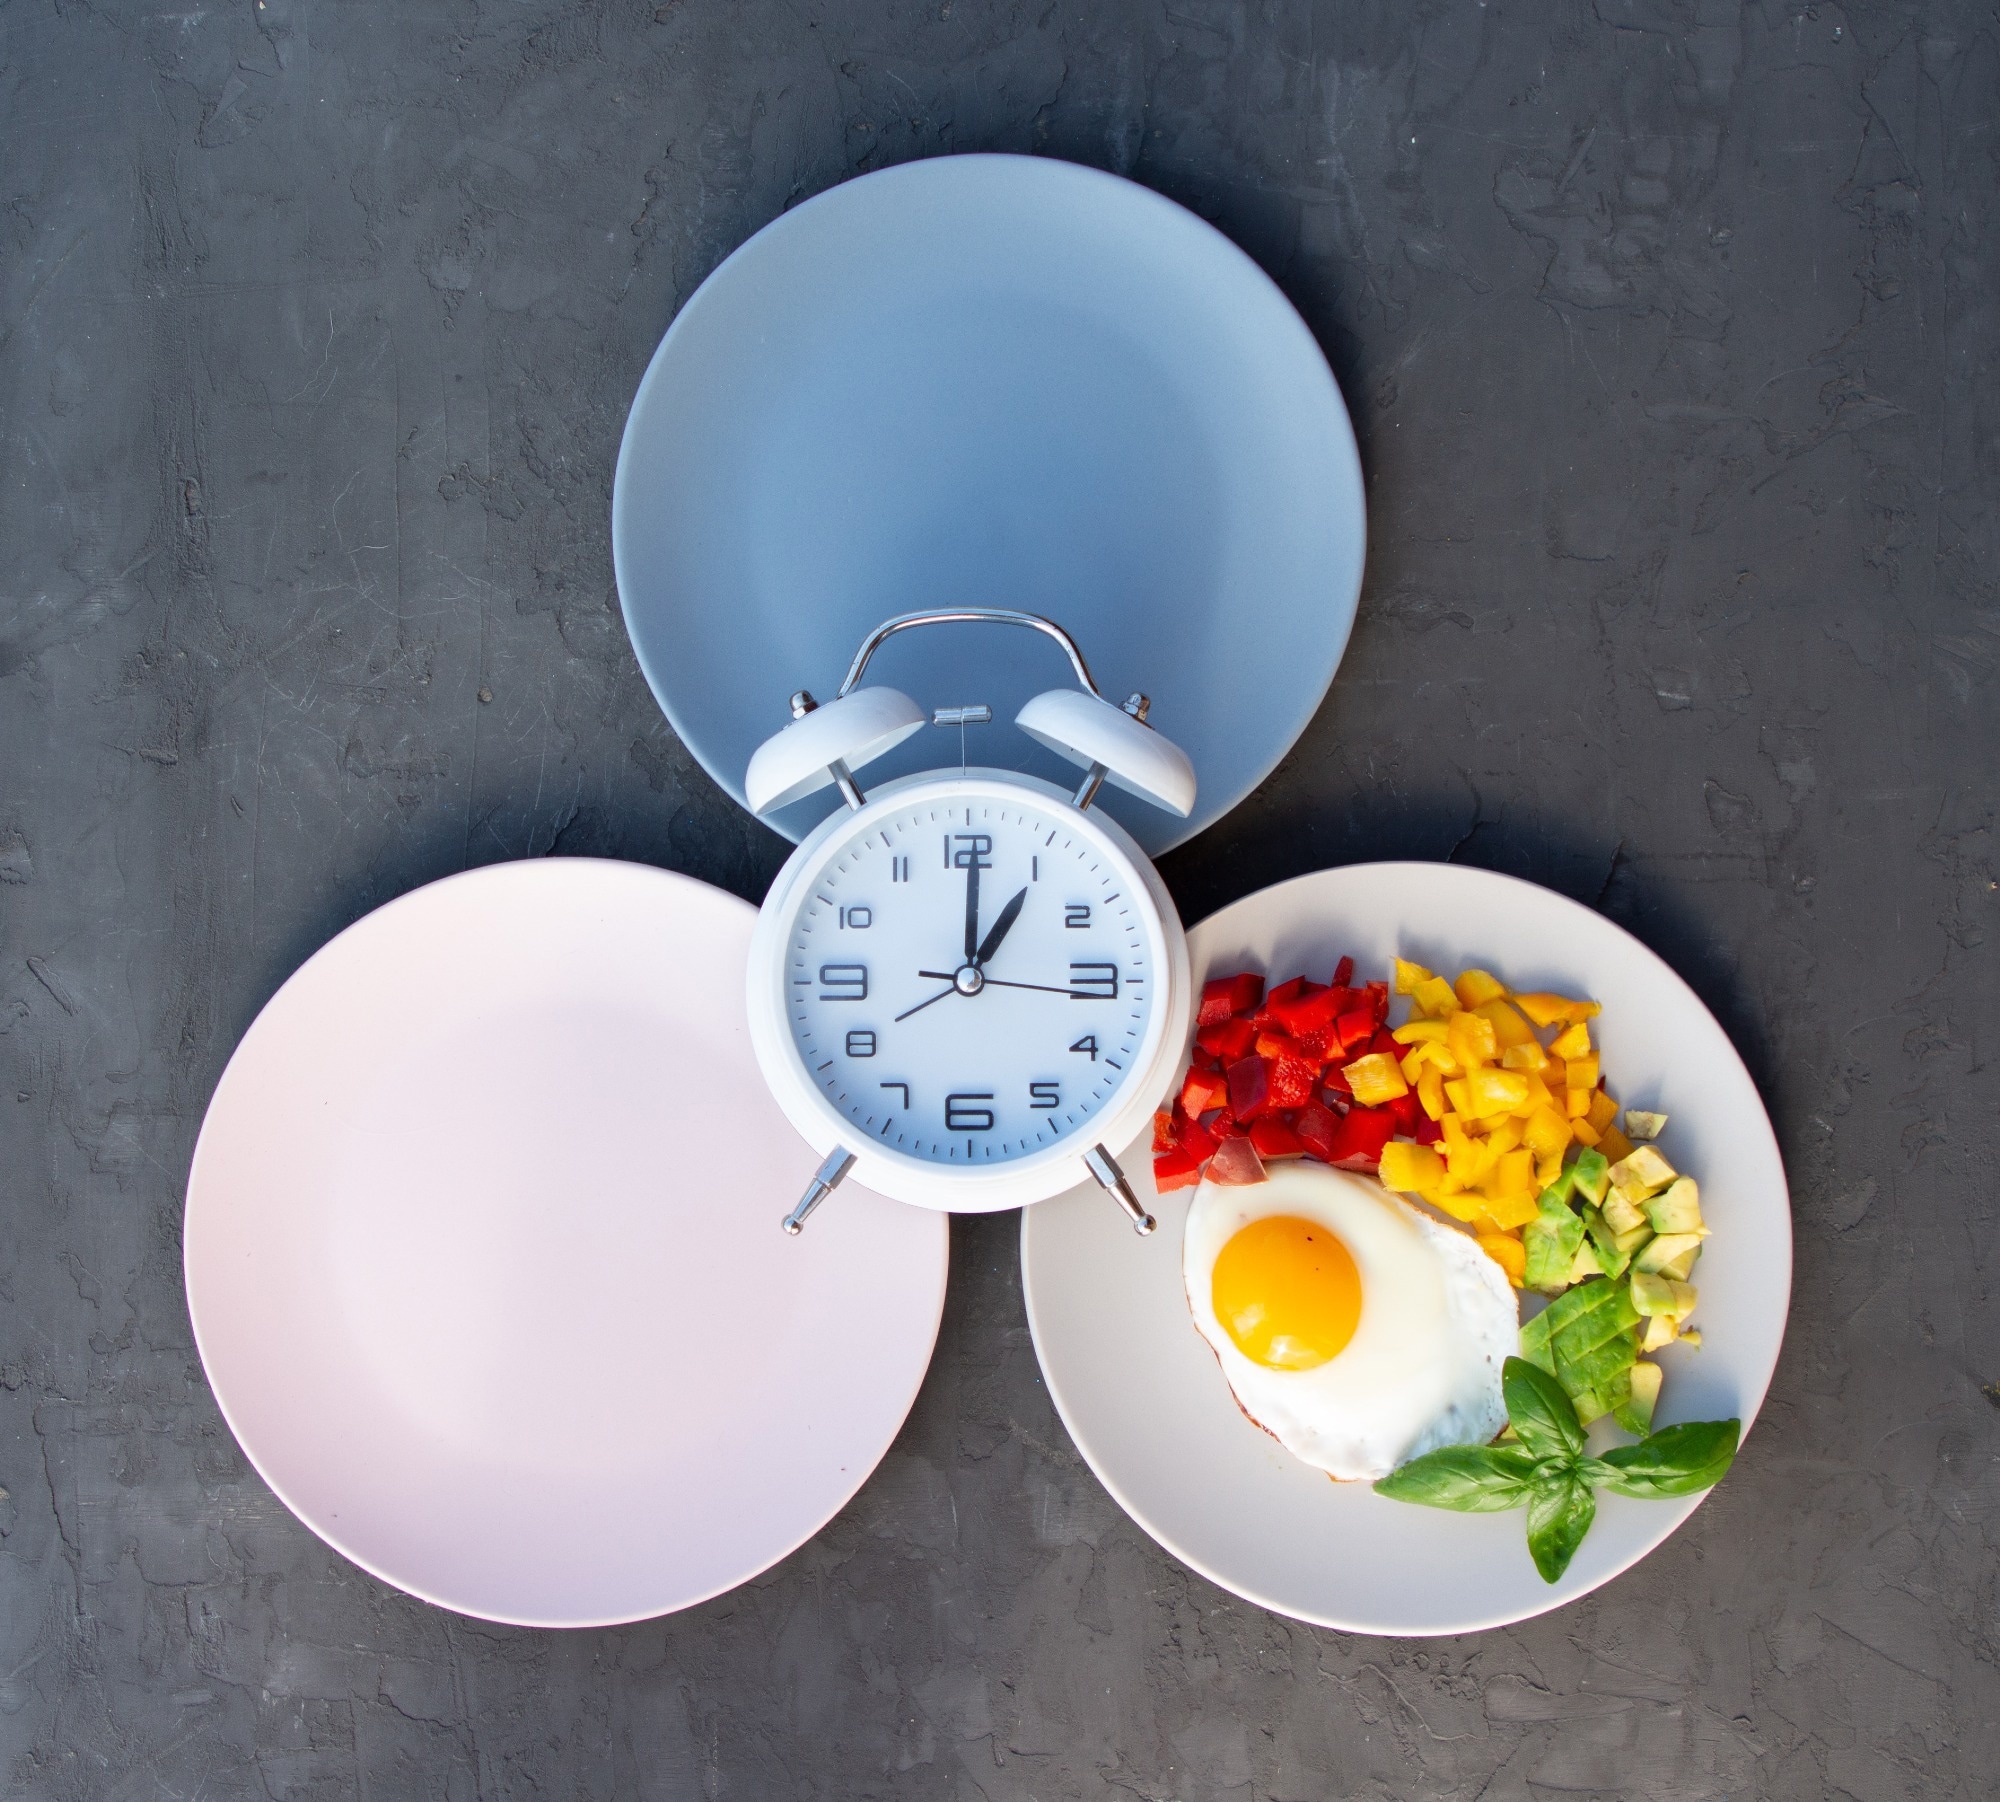 Study: Brain–Gut–Microbiome Interactions and Intermittent Fasting in Obesity. Image Credit: Kreminska / Shutterstock